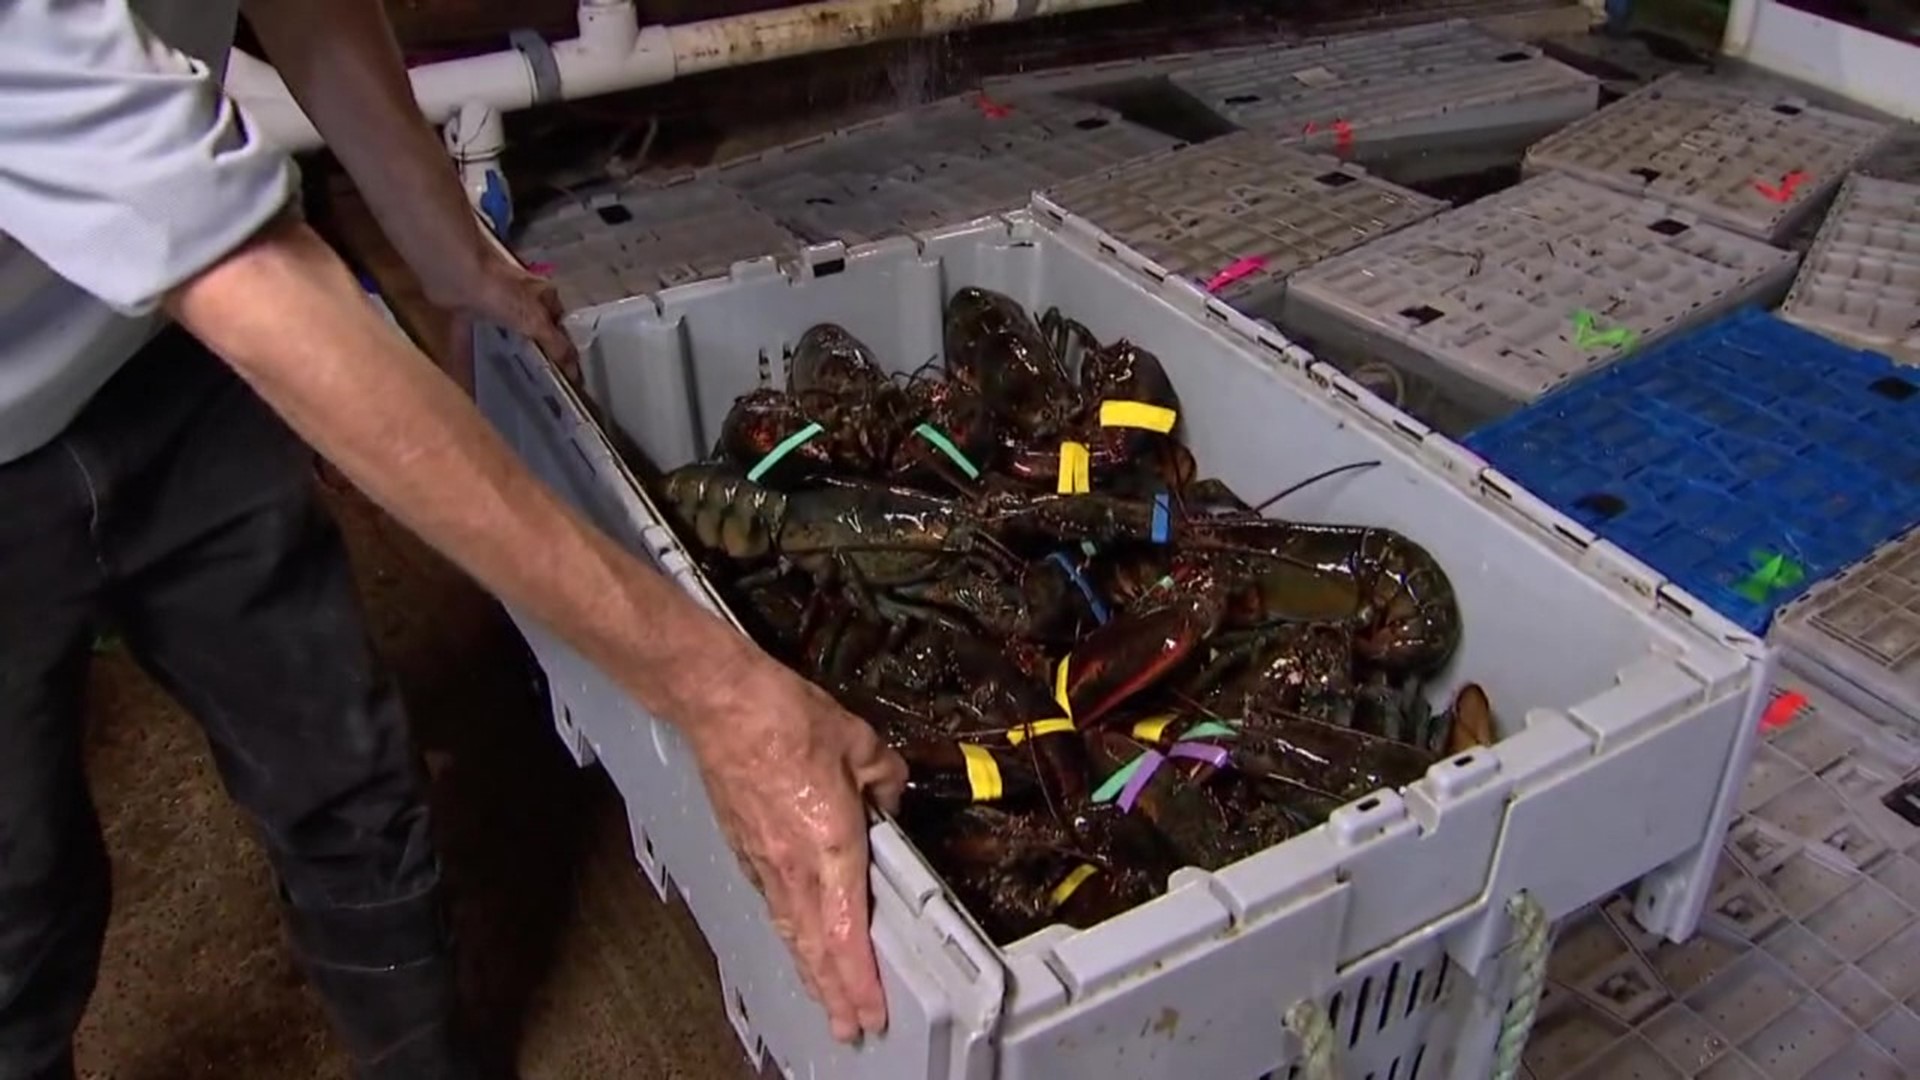 A new report sounded the alarm on an endangered species, saying certain types of lobster should be avoided.